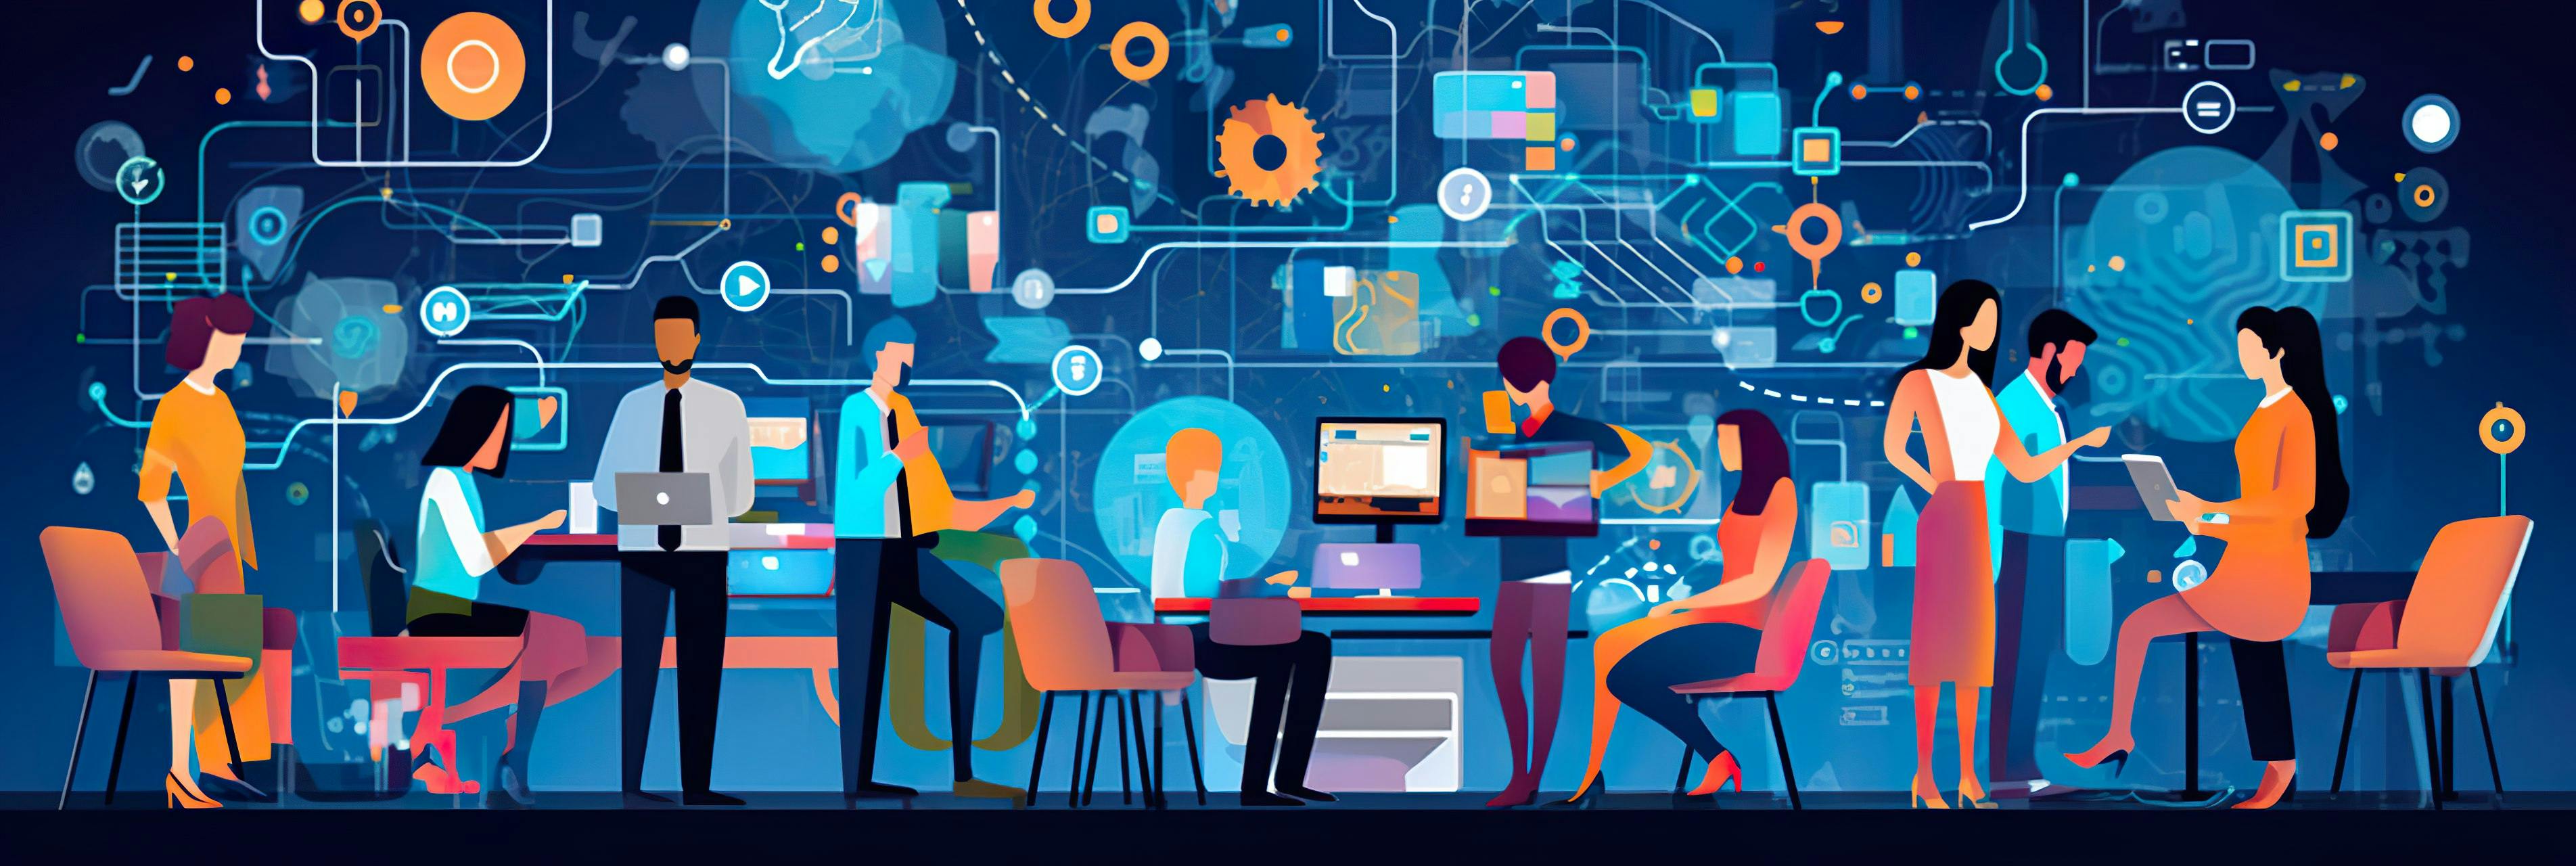 2d illustration of people working together and using modern technologies like laptops. The background is made of pcb like connections and gears.